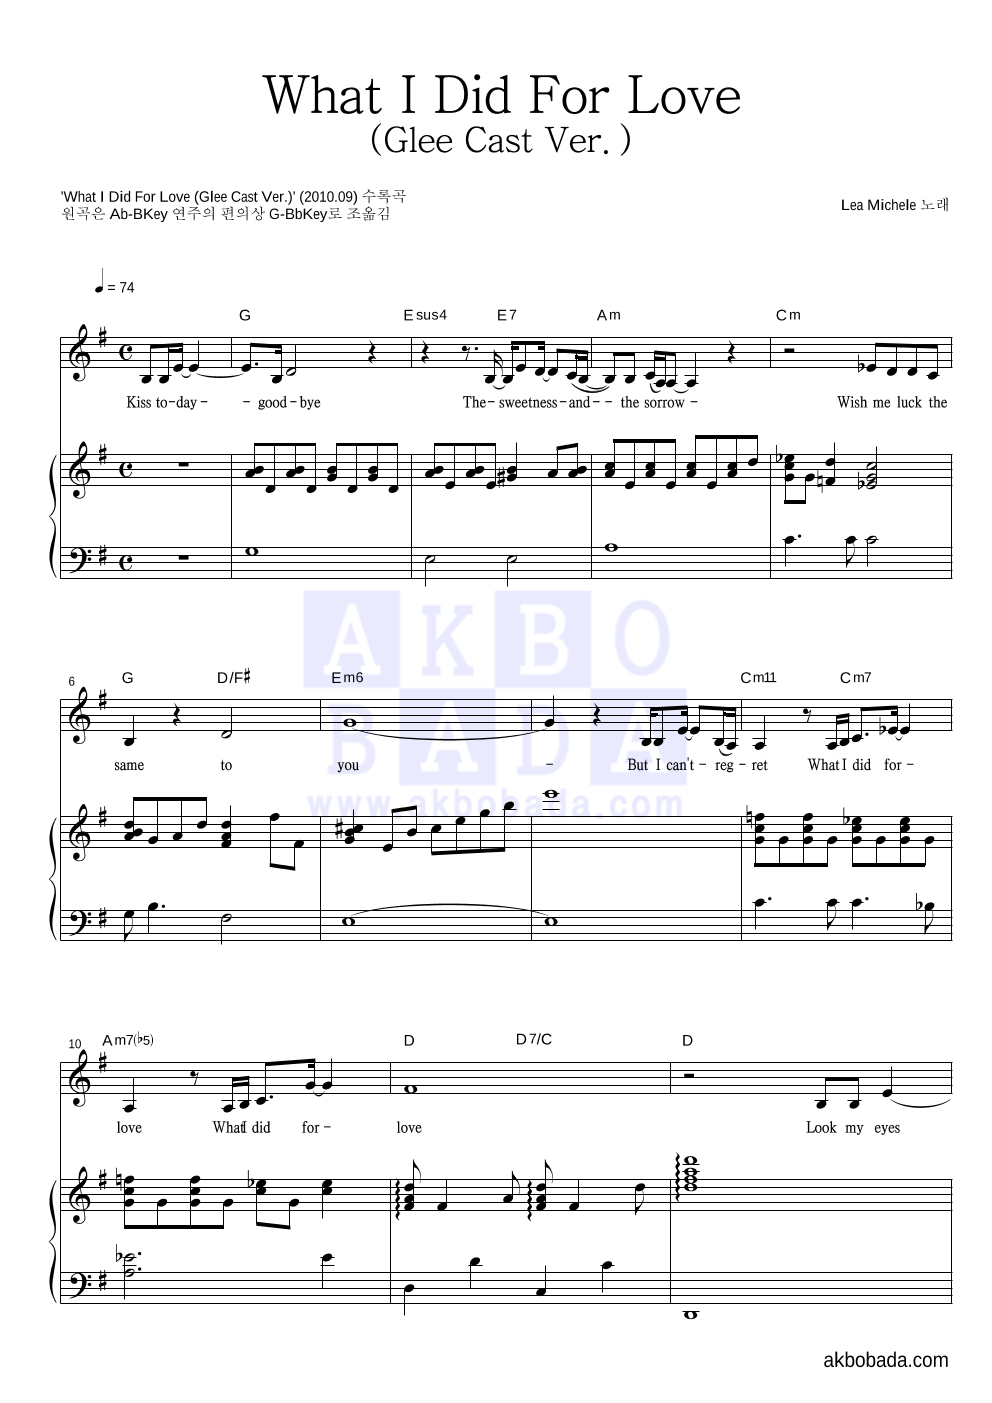 Glee Cast - What I Did For Love (Glee Cast Ver.) 피아노 3단 악보 